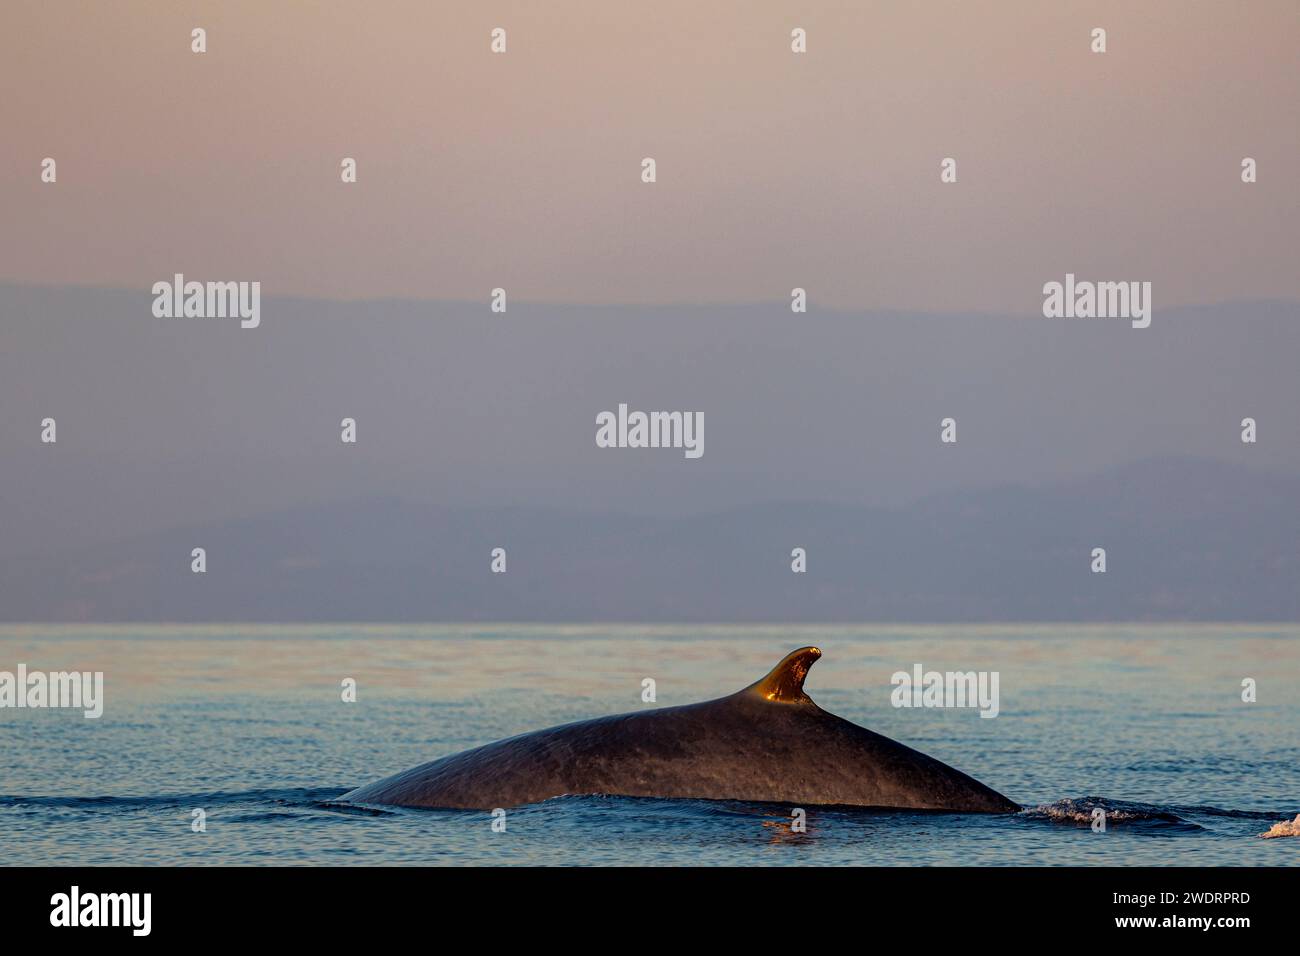 a whale's back in the sunset Stock Photo